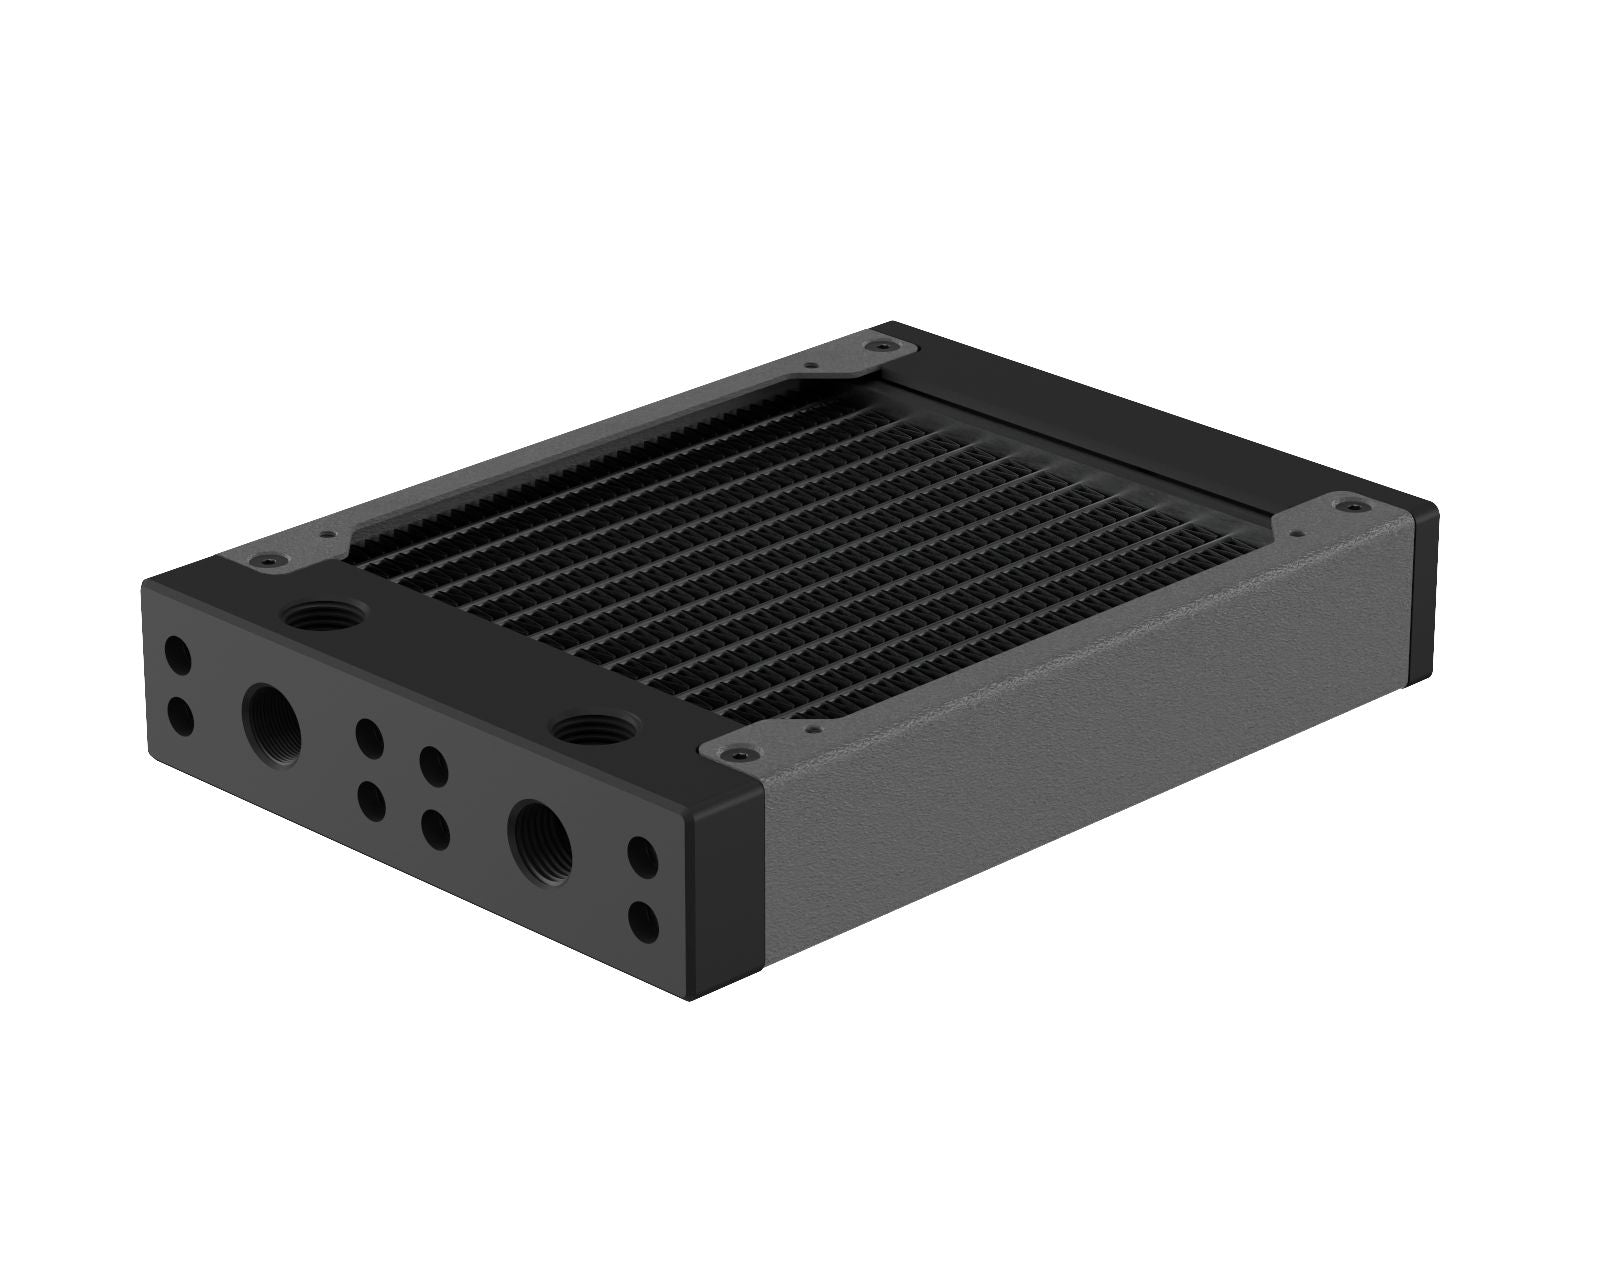 PrimoChill 120SL (30mm) EXIMO Modular Radiator, Black POM, 1x120mm, Single Fan (R-SL-BK12) Available in 20+ Colors, Assembled in USA and Custom Watercooling Loop Ready - TX Matte Gun Metal